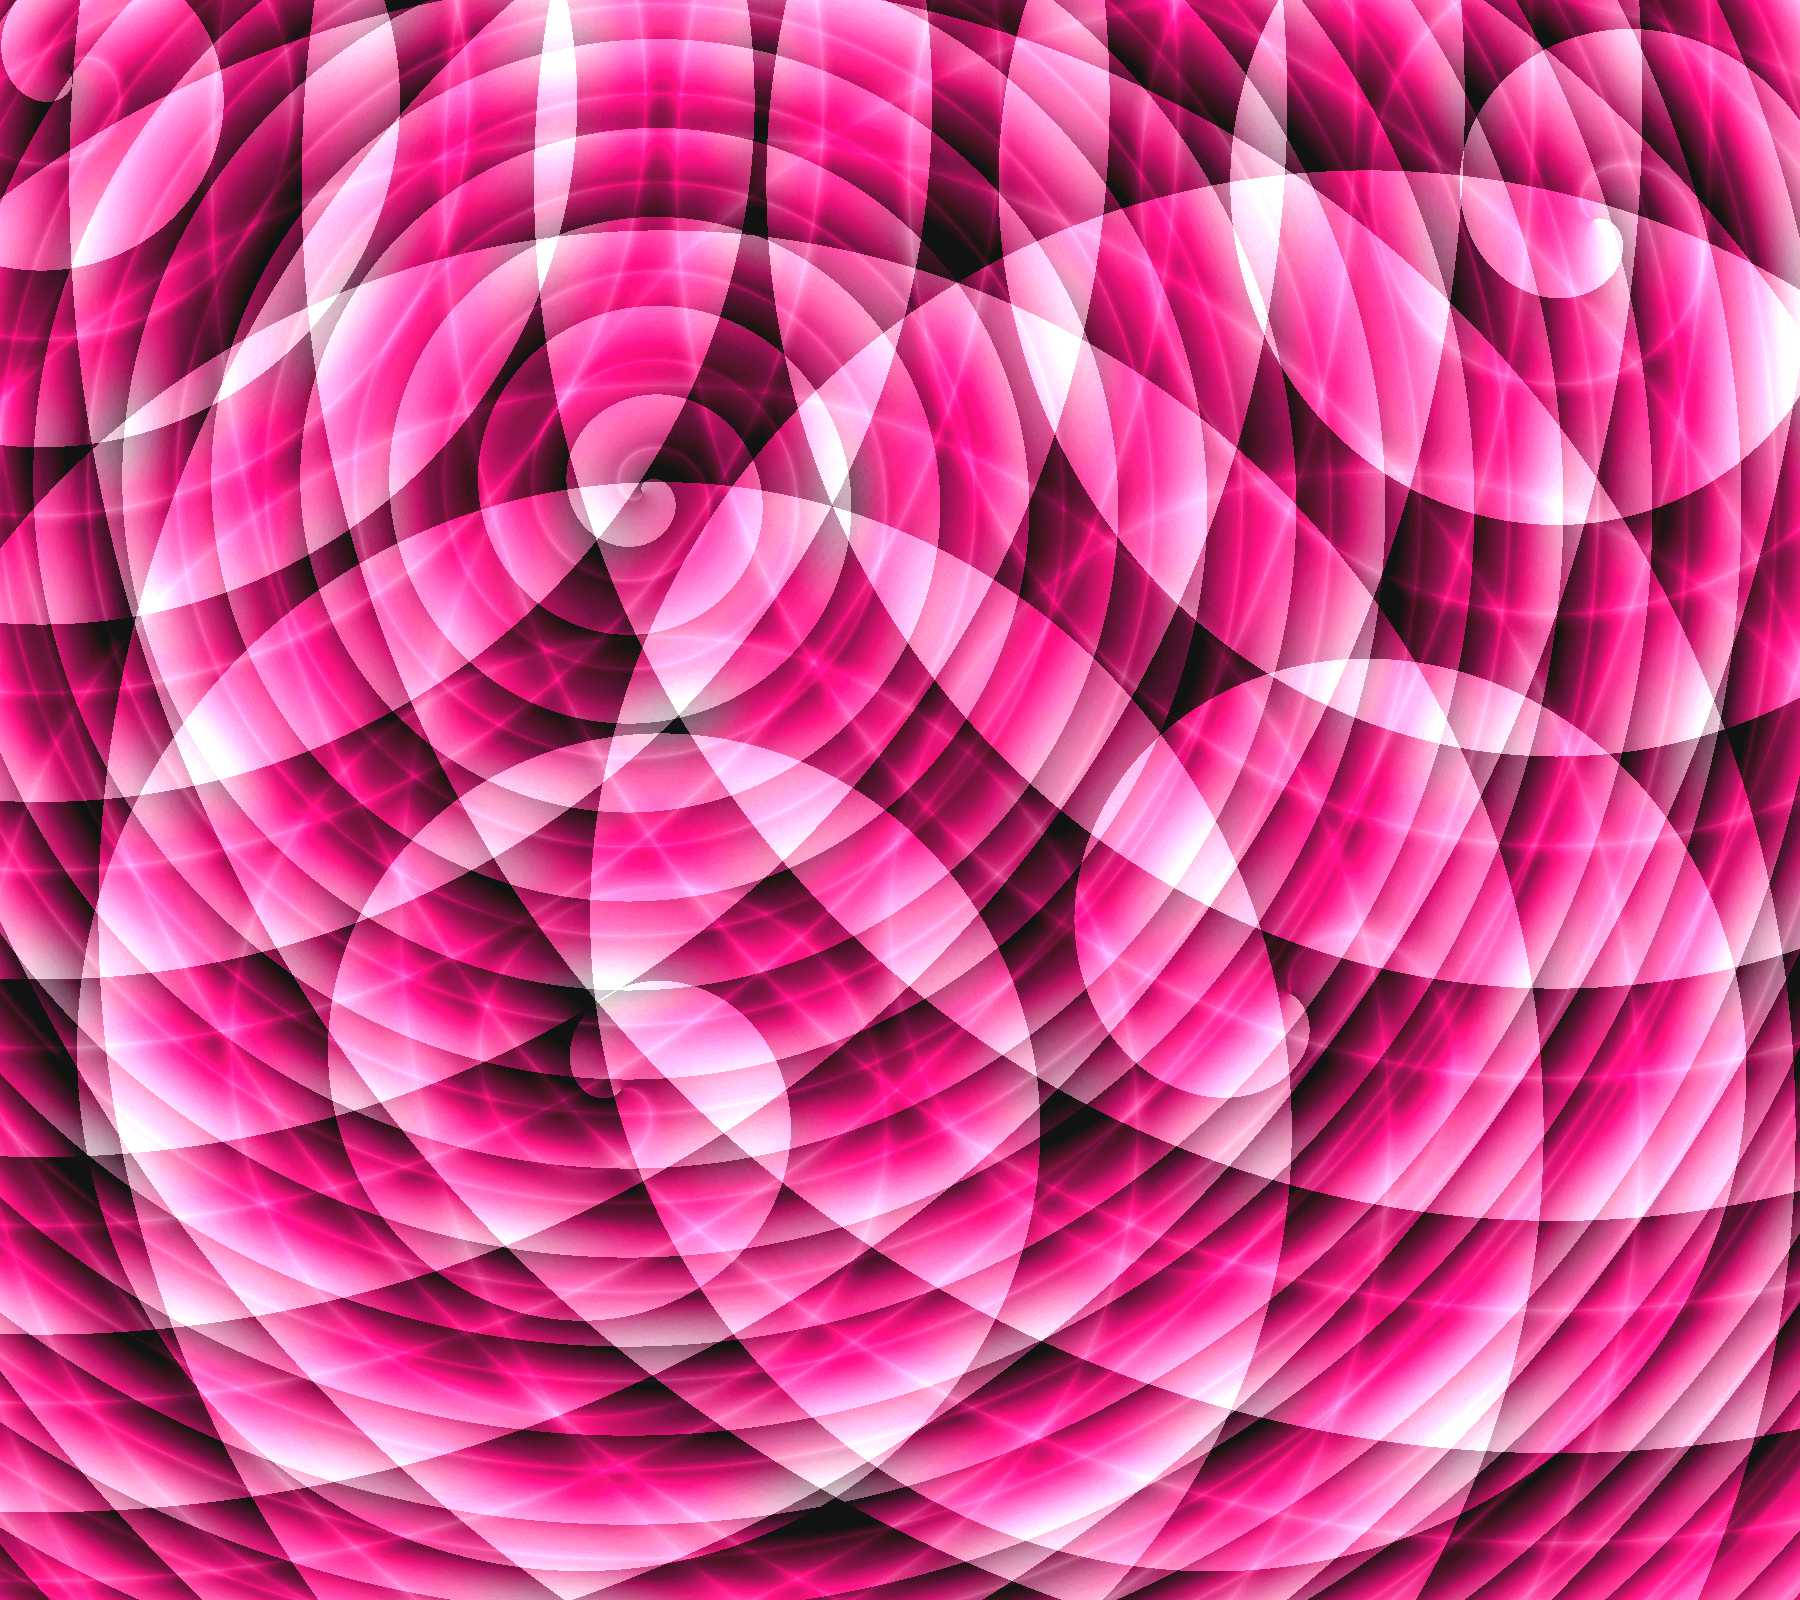 Hot Pink Spiral Designs Black And White